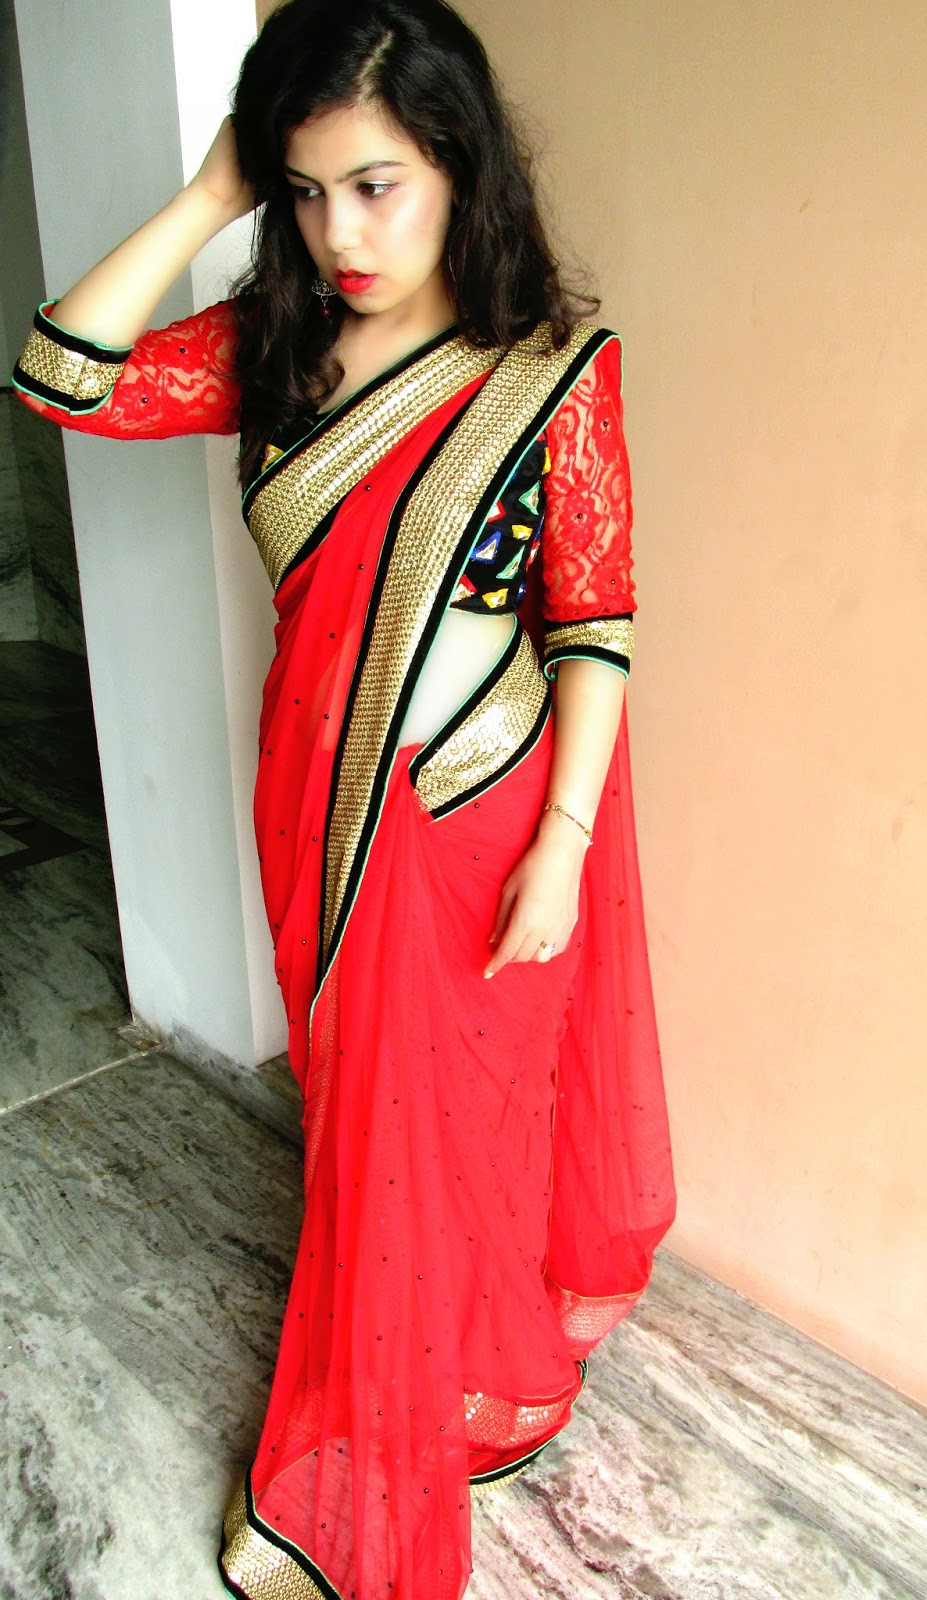 Tall Girls Saree Hacks That You Must Know If You Are a Tall Girl